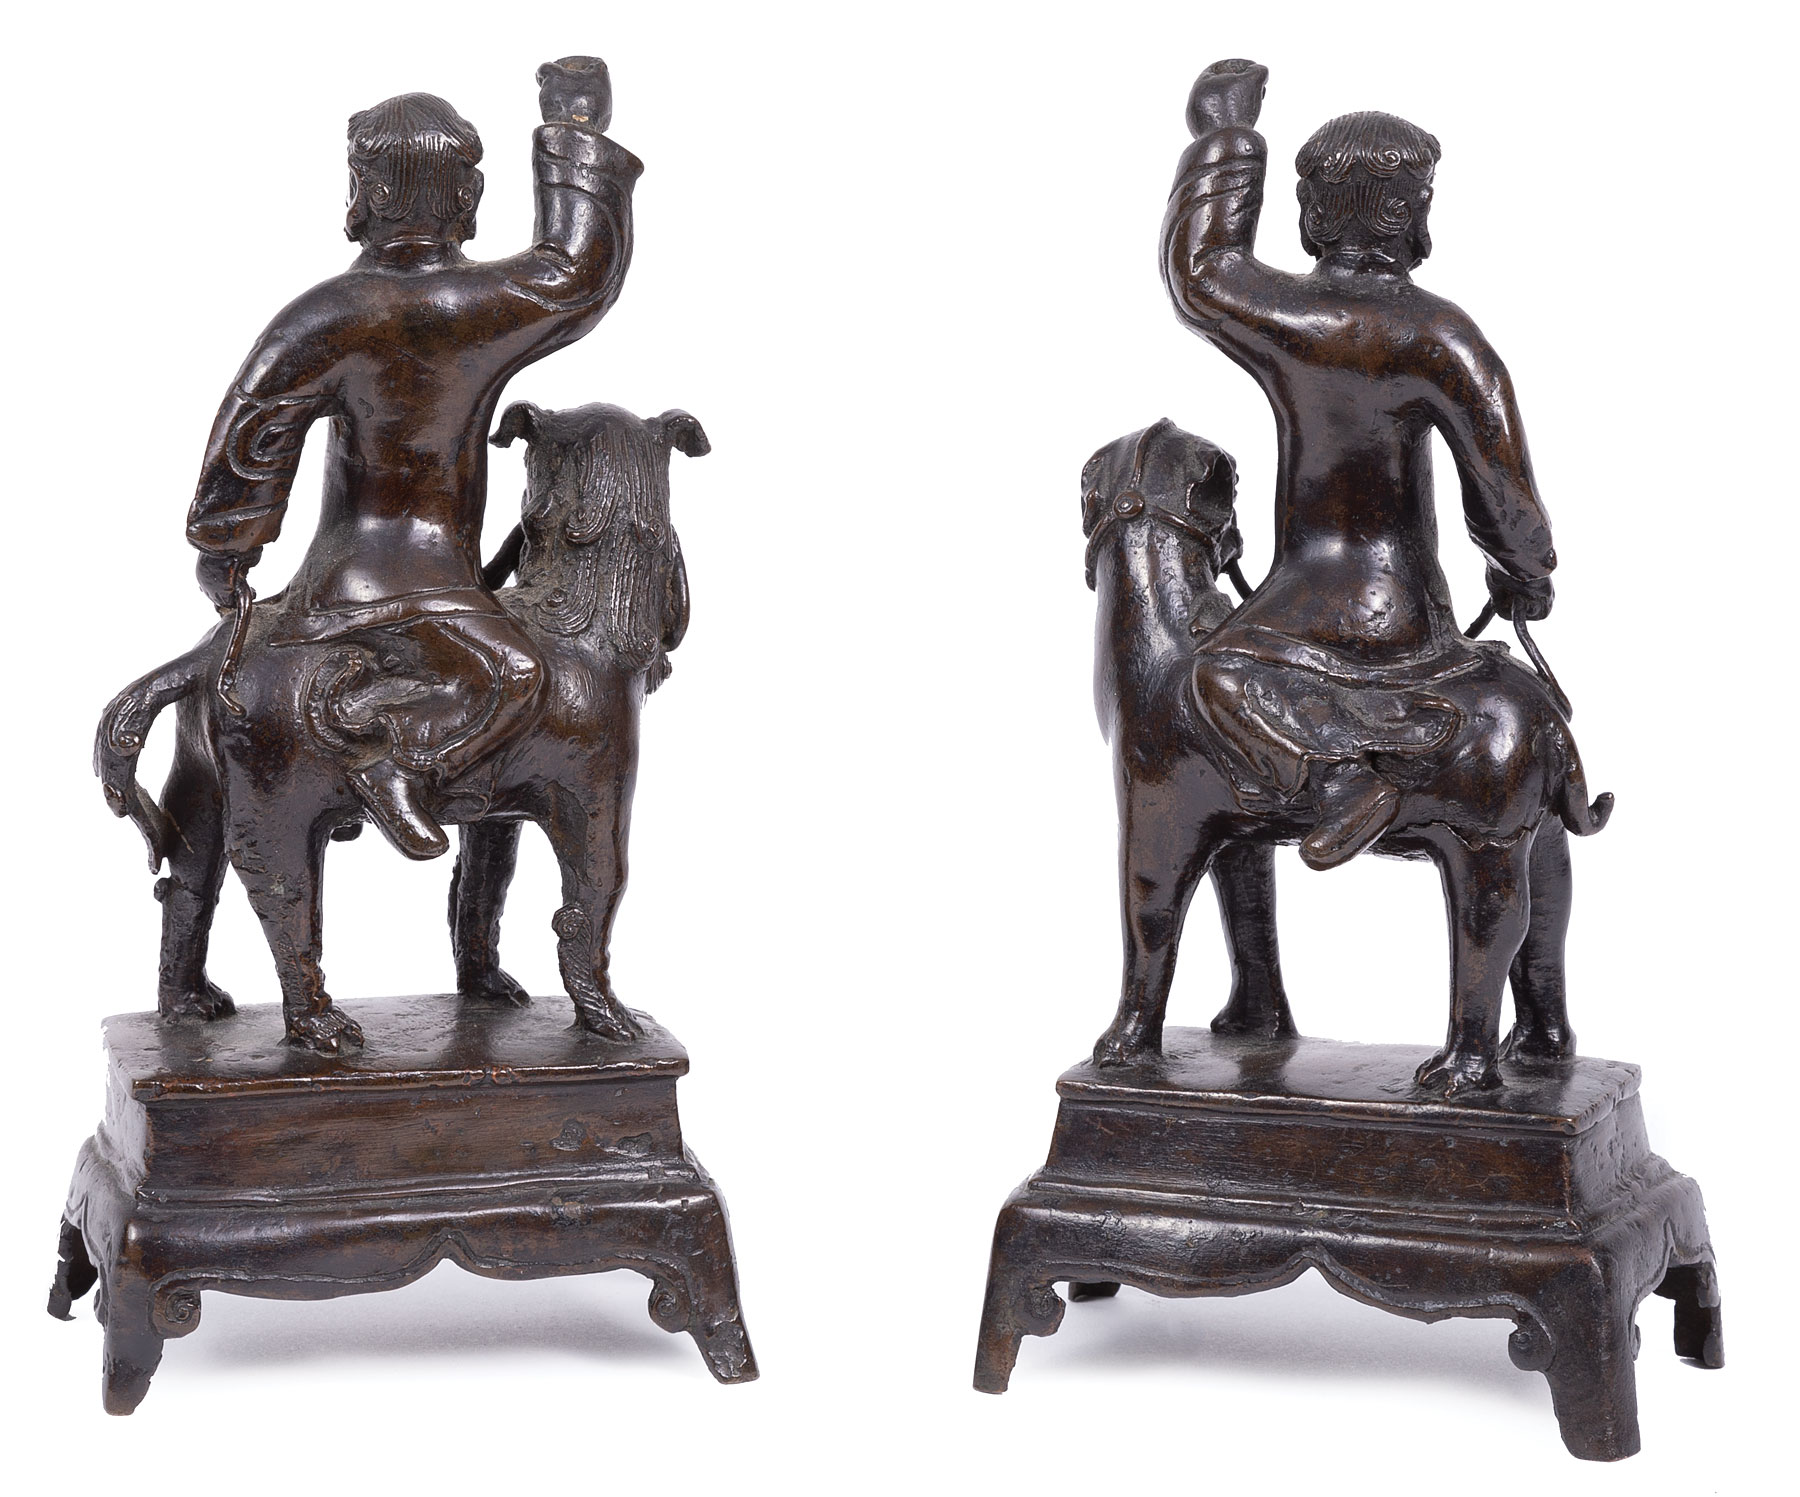 Pair of Chinese Bronze Figural Groups of Foreigners , probably early Qing Dynasty (1644-1911), - Image 2 of 2